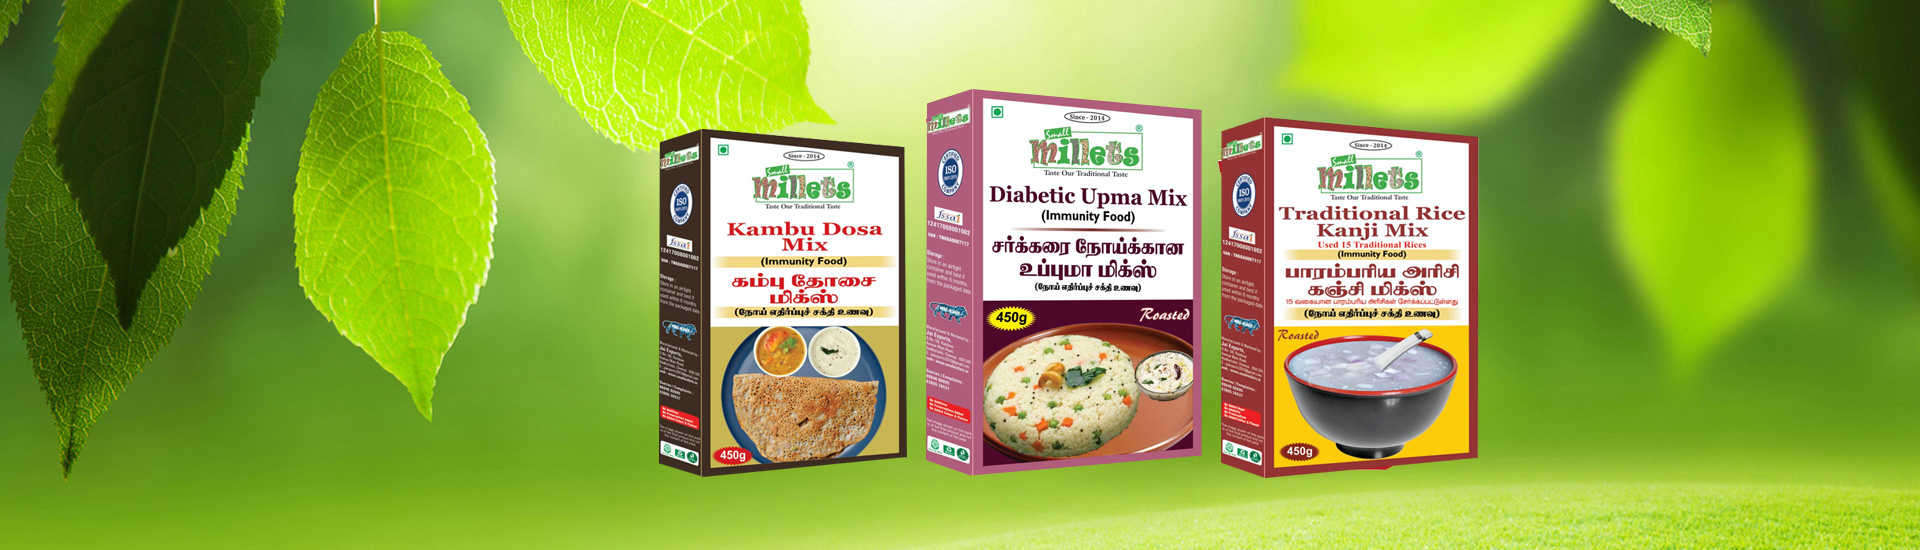 Small Millets products chennai